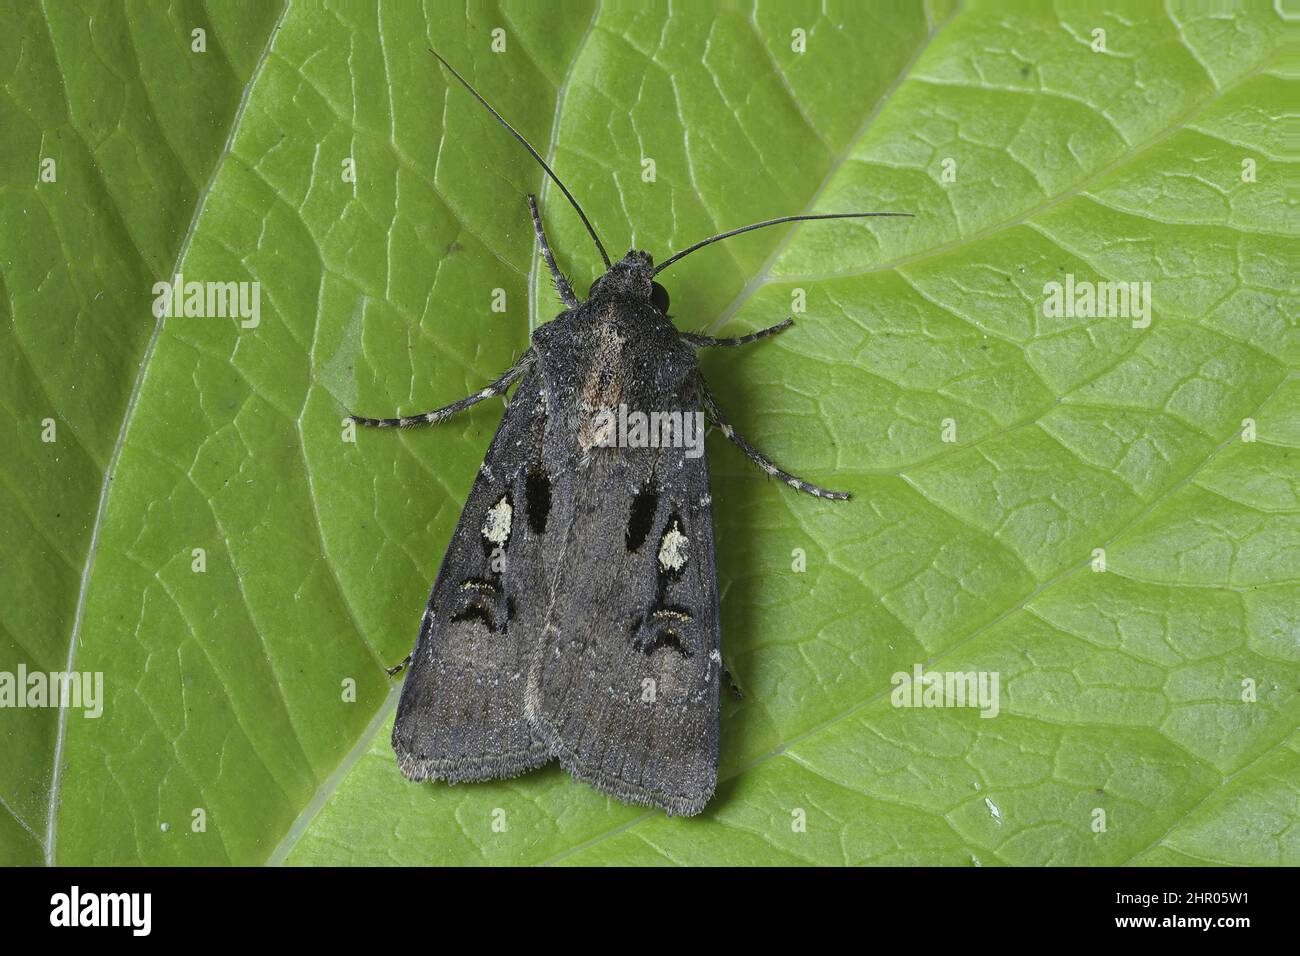 Crescent dart (Agrotis trux) on a leaf, Cotes d'Armor, Brittany, France Stock Photo